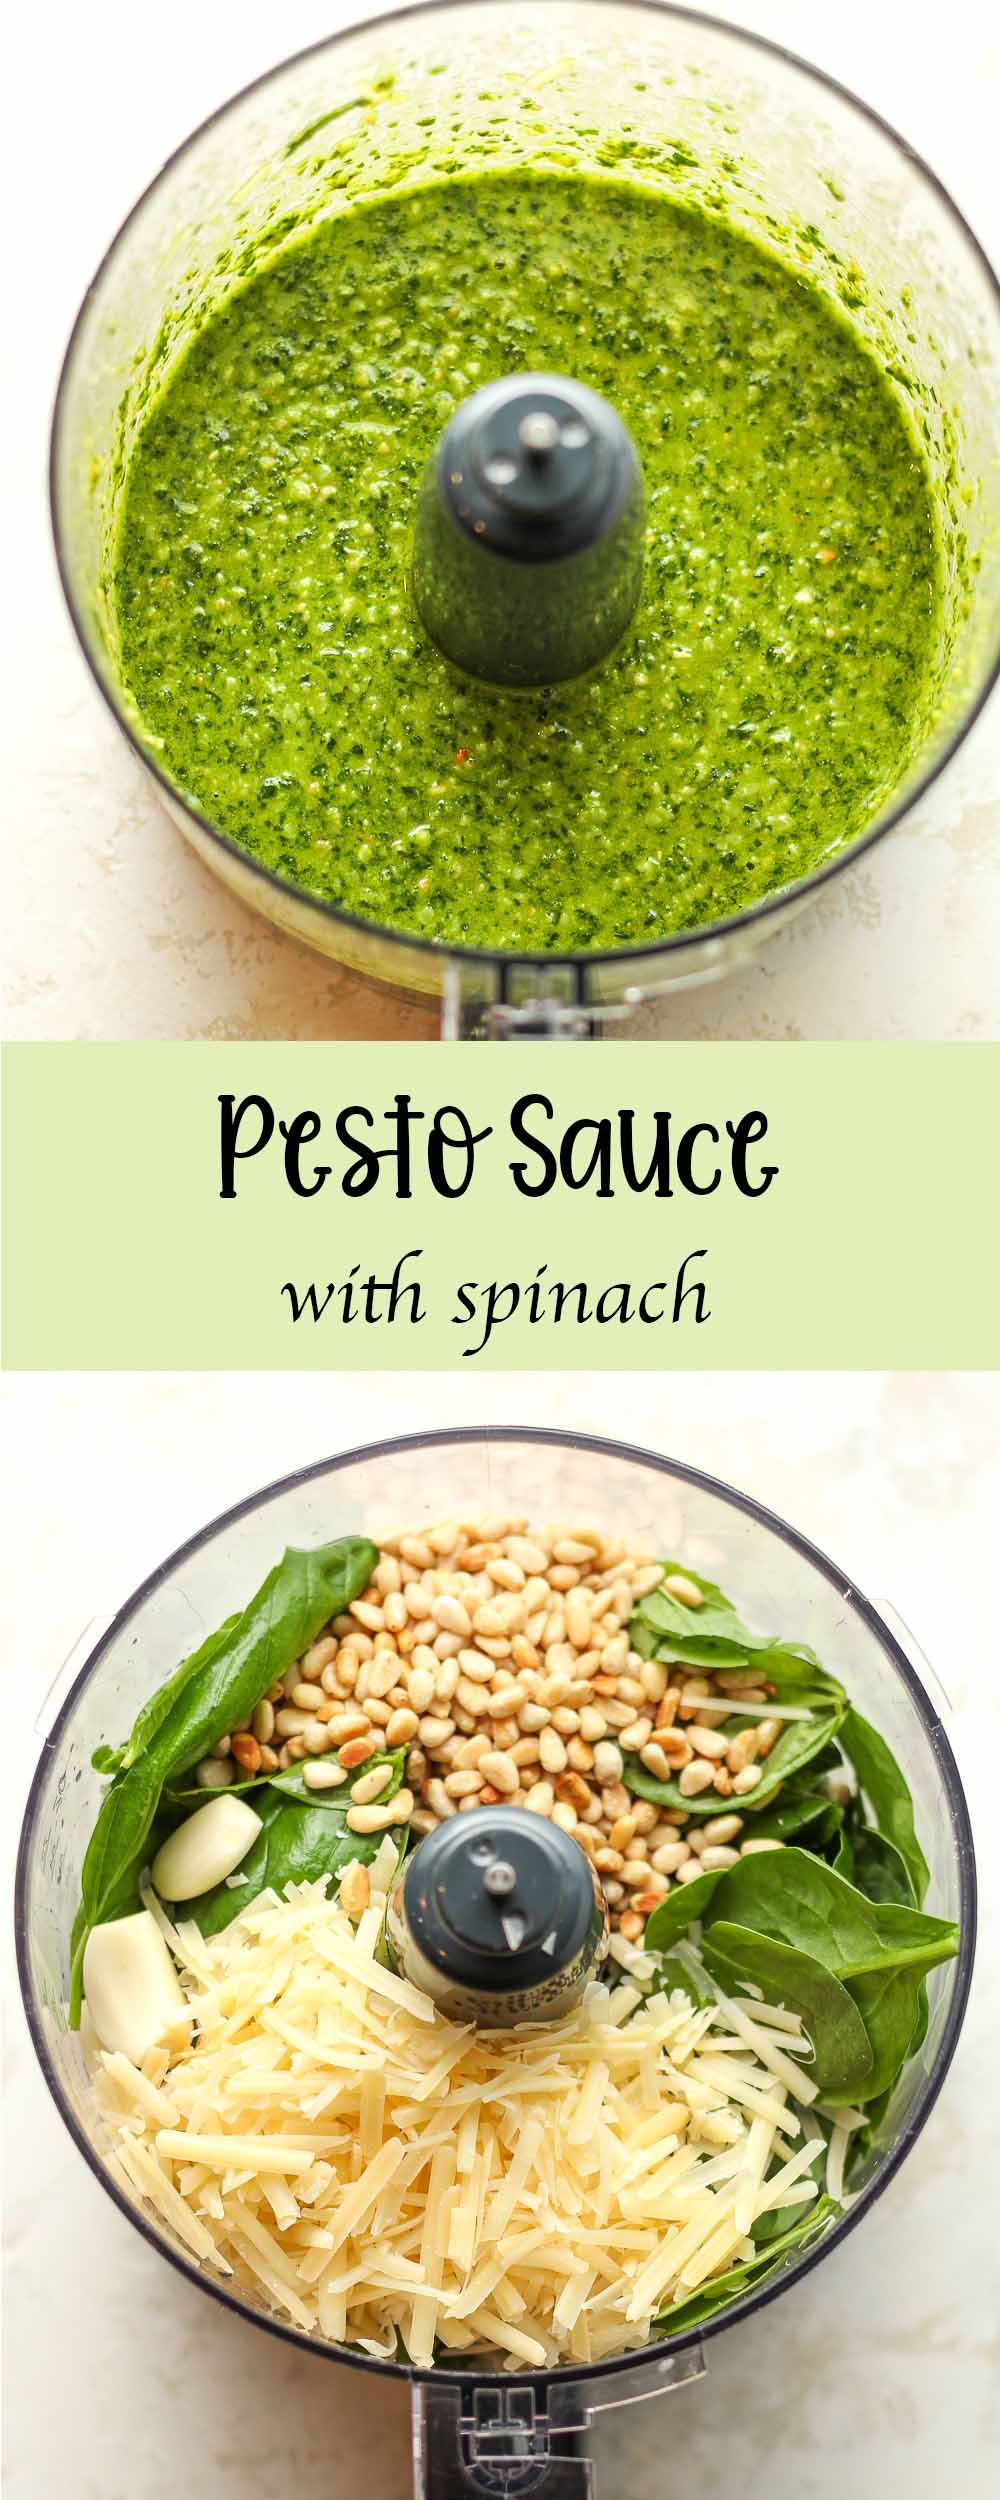 A collage of pesto sauce with spinach.